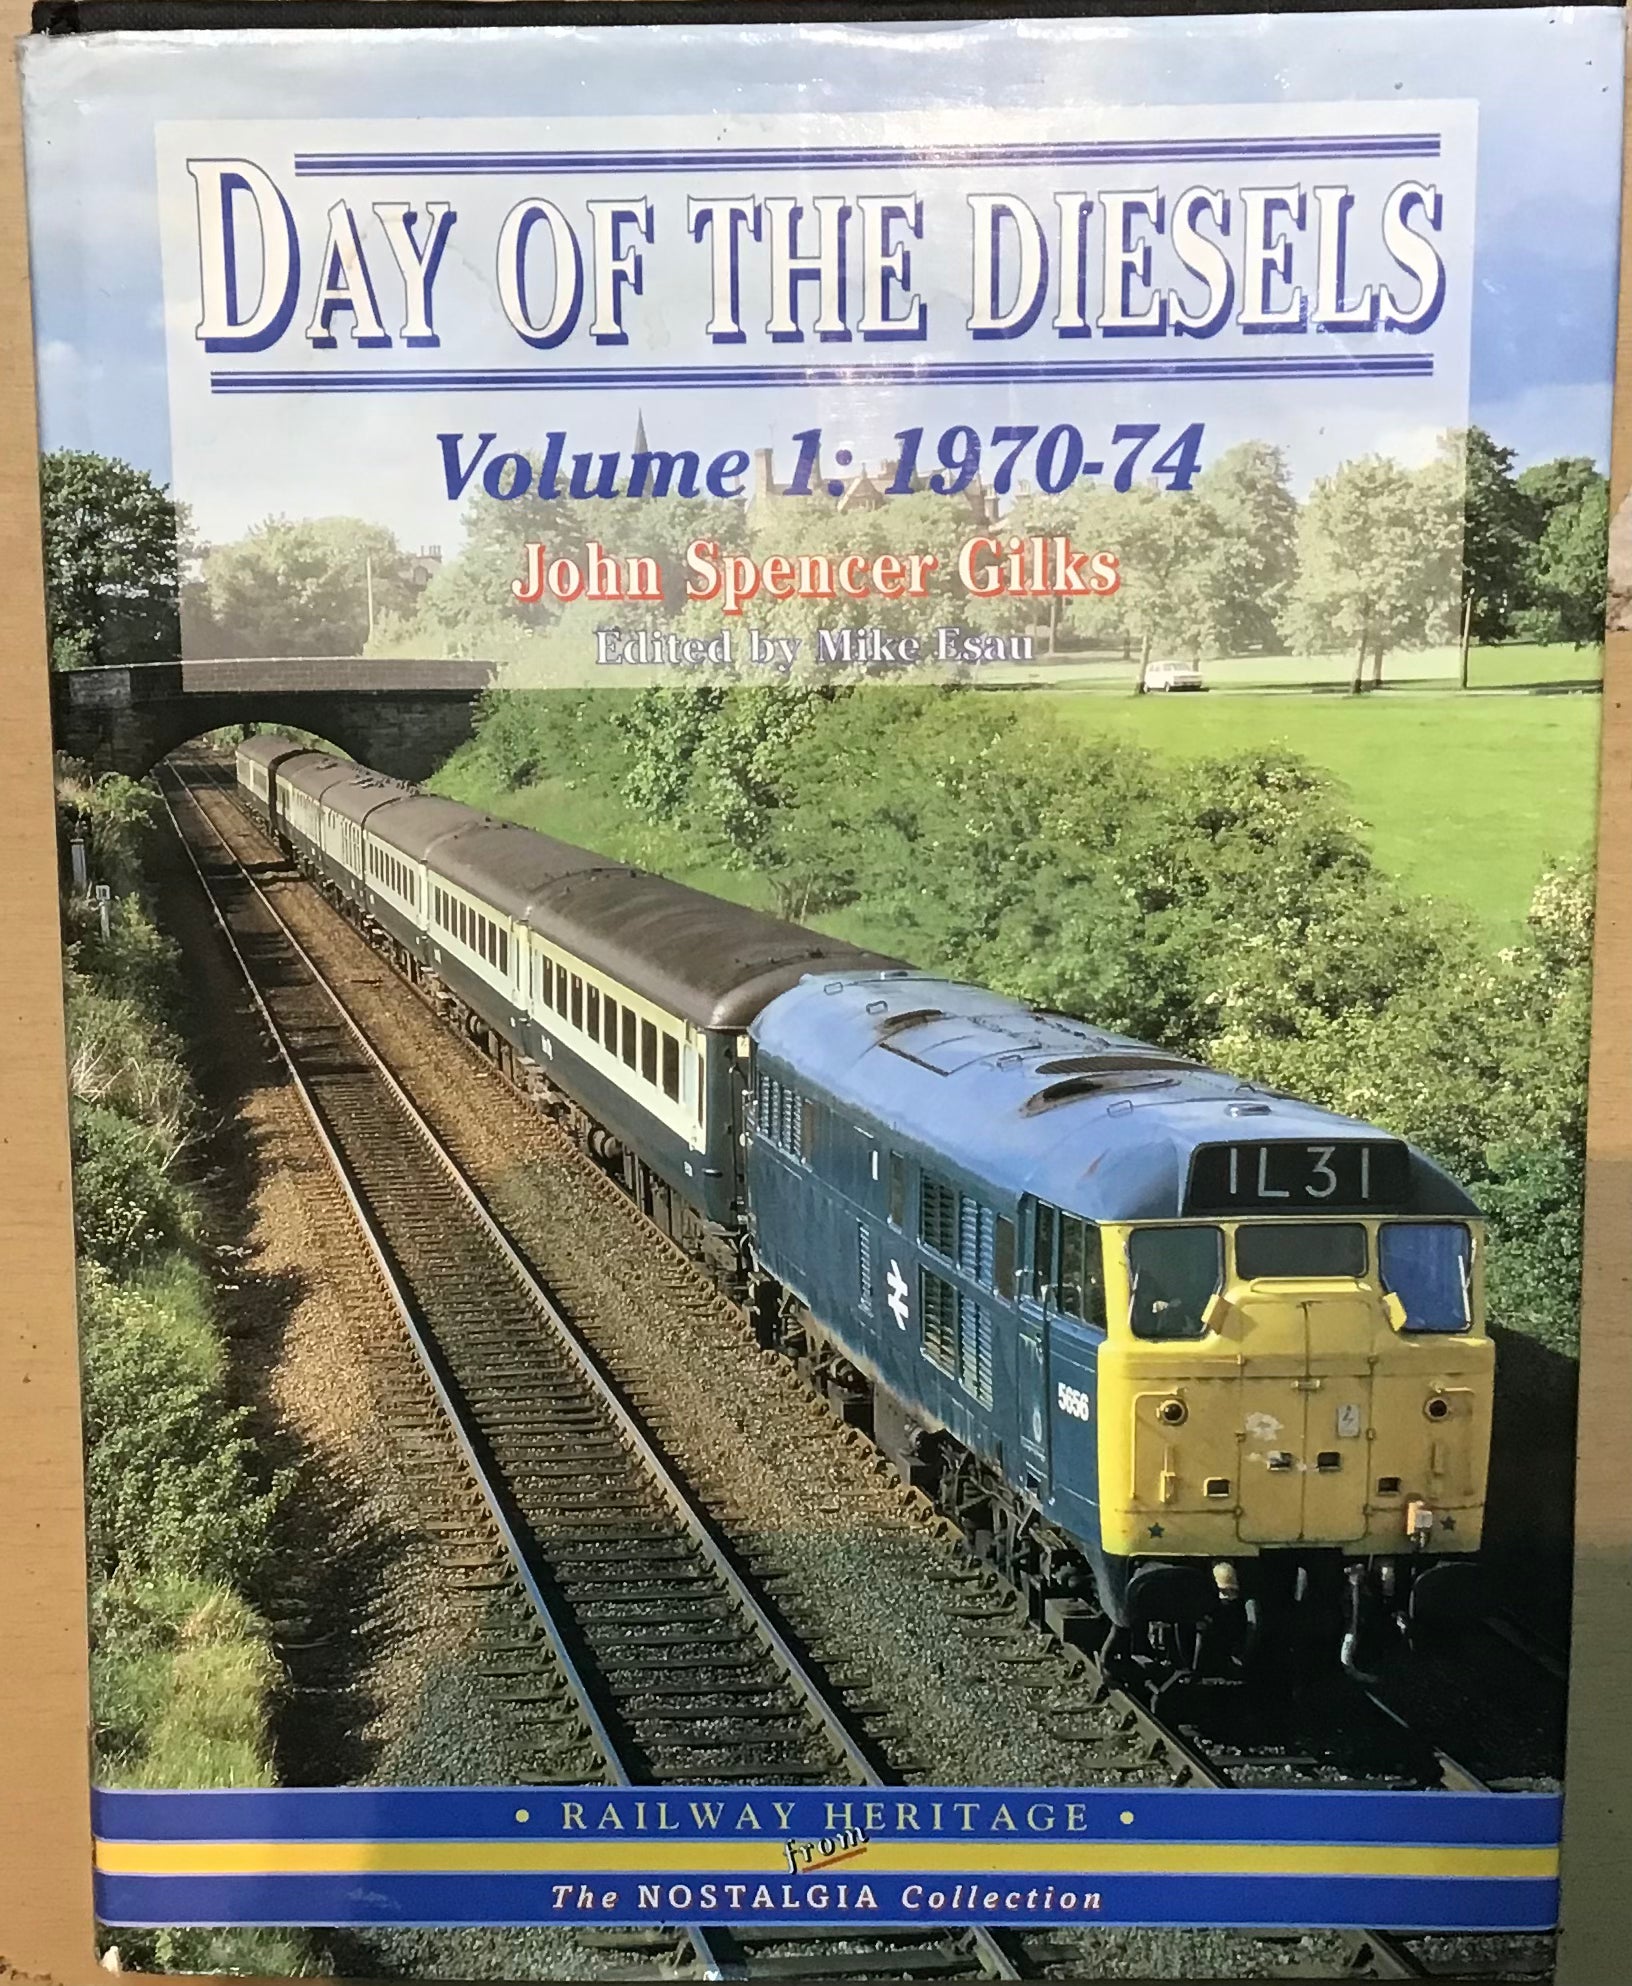 Day of the Diesels Volume 1: 1970-74 by John Spencer Gilks and Mike Esau - Chester Model Centre